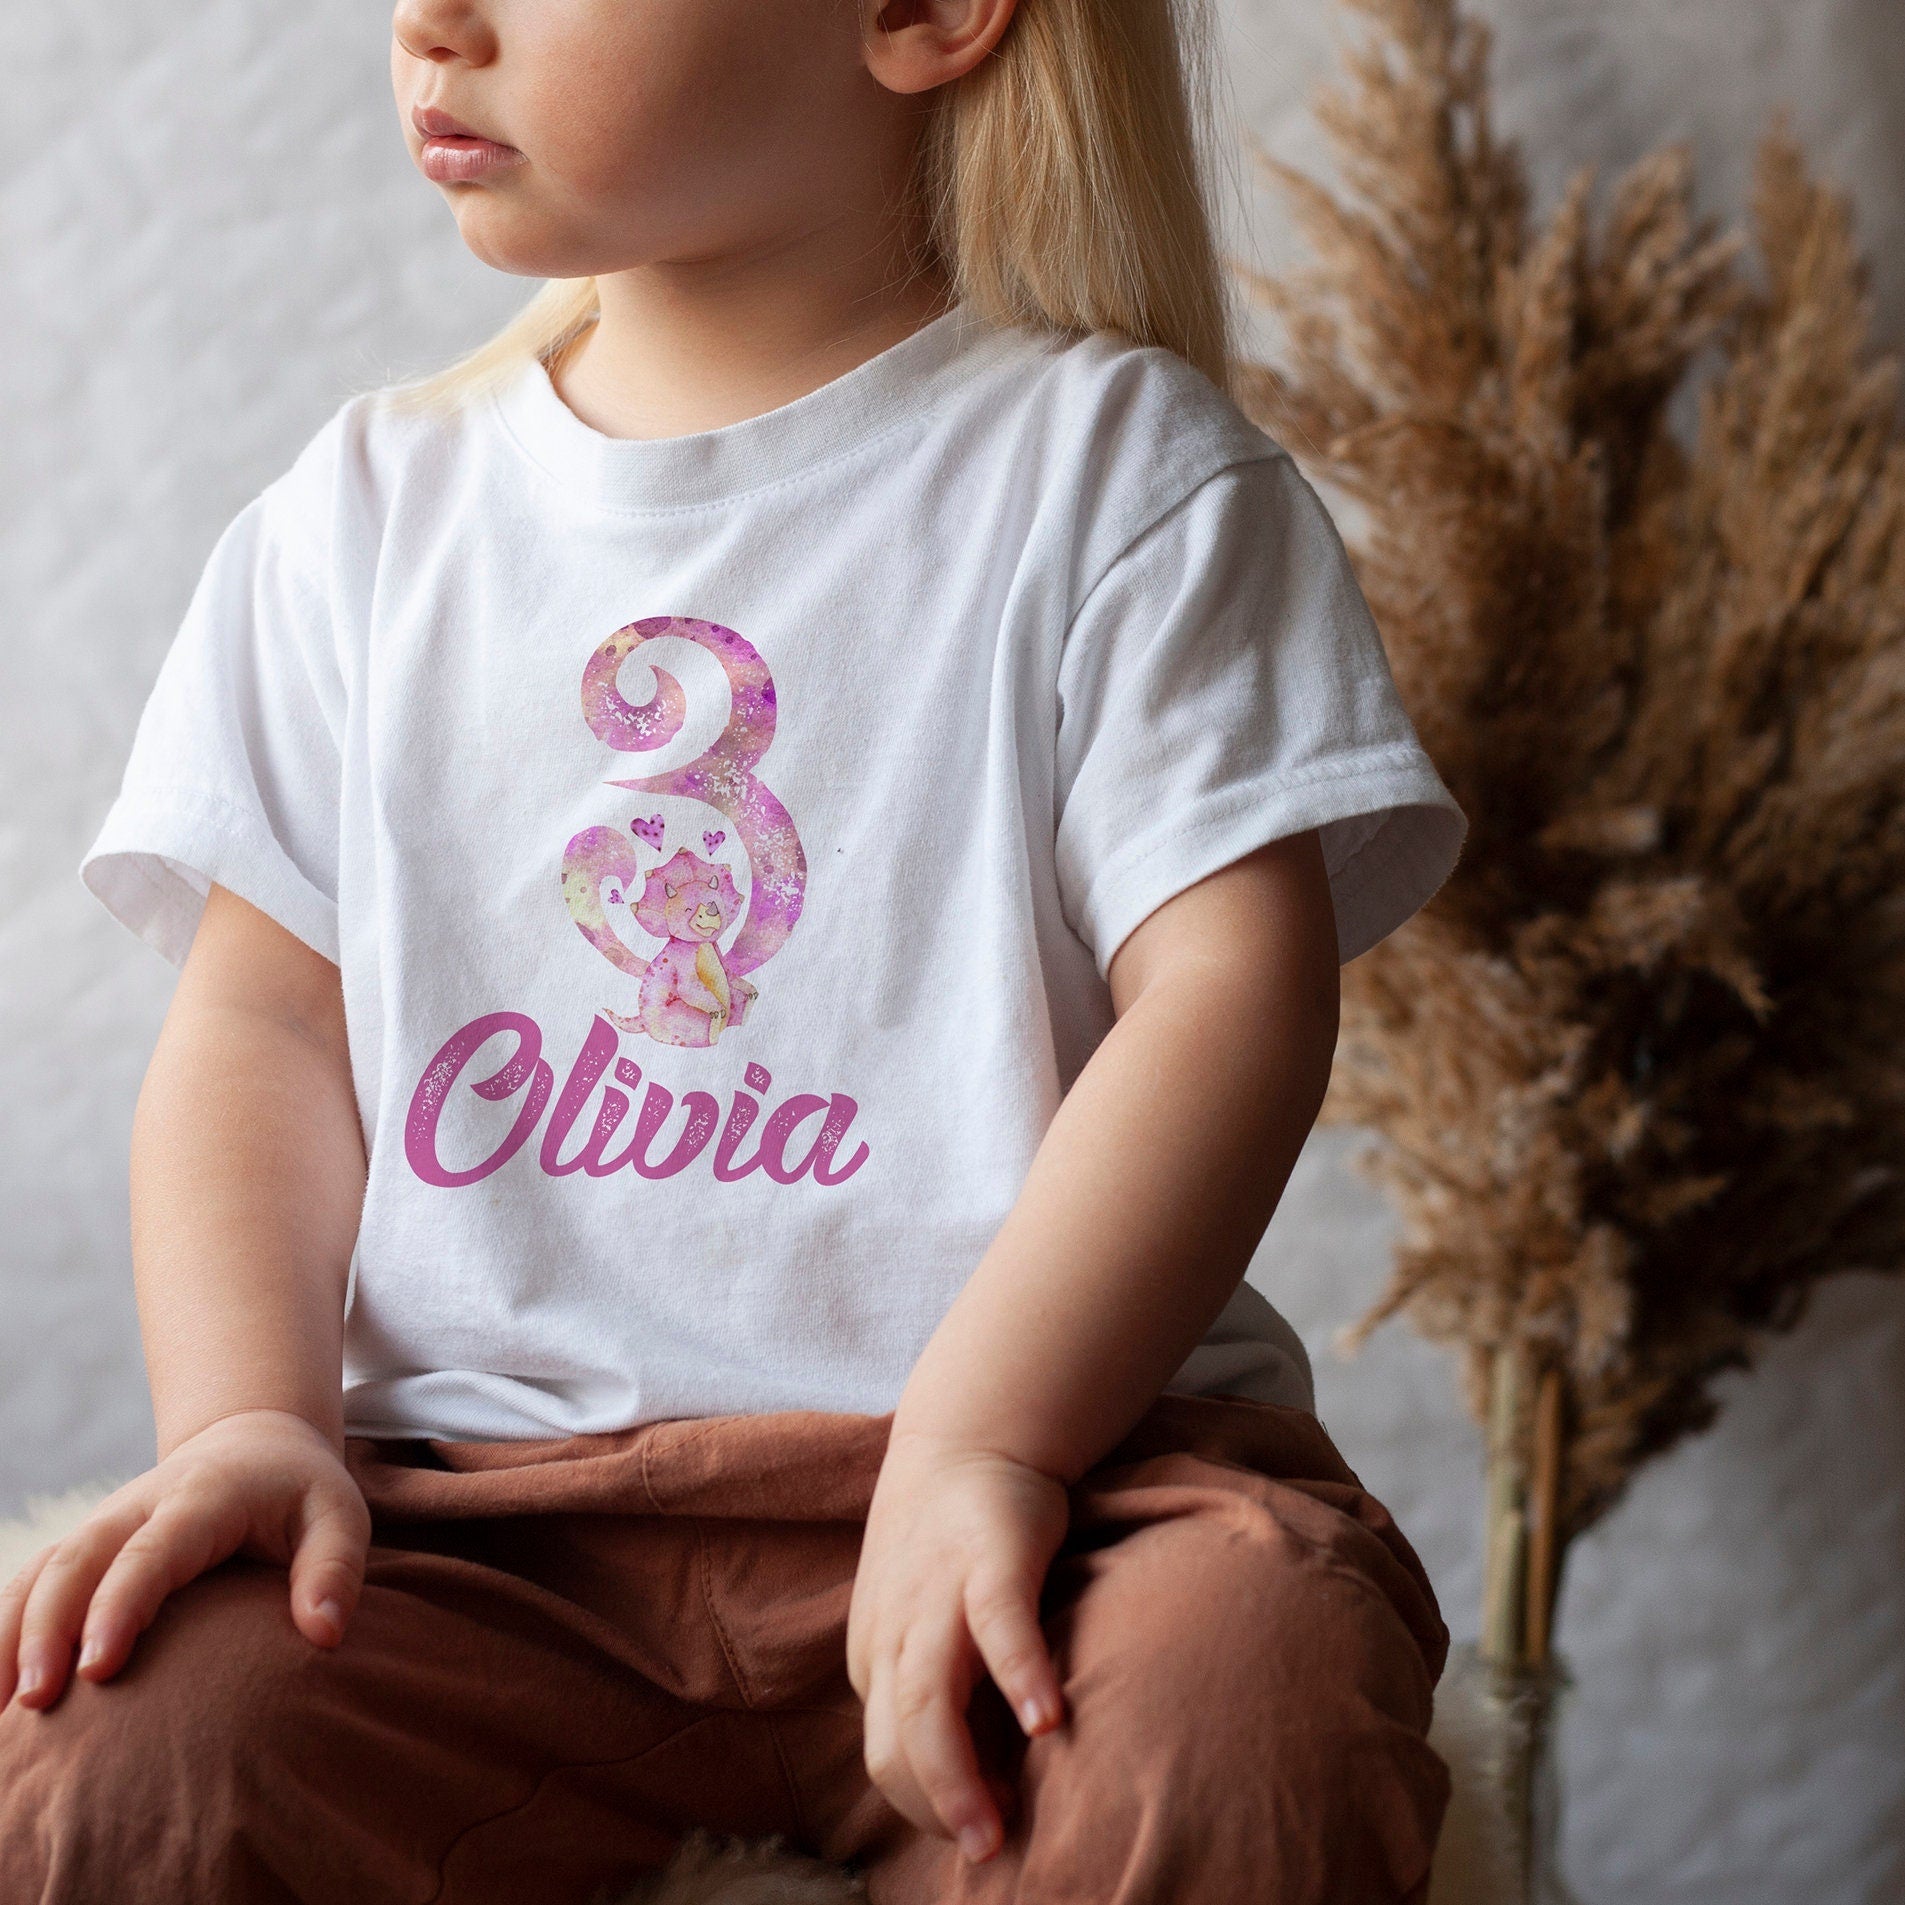 Personalised Dinosaur Kids Birthday T-Shirt, Pink Or Blue Options, Boy Girl Tshirt Top With Name